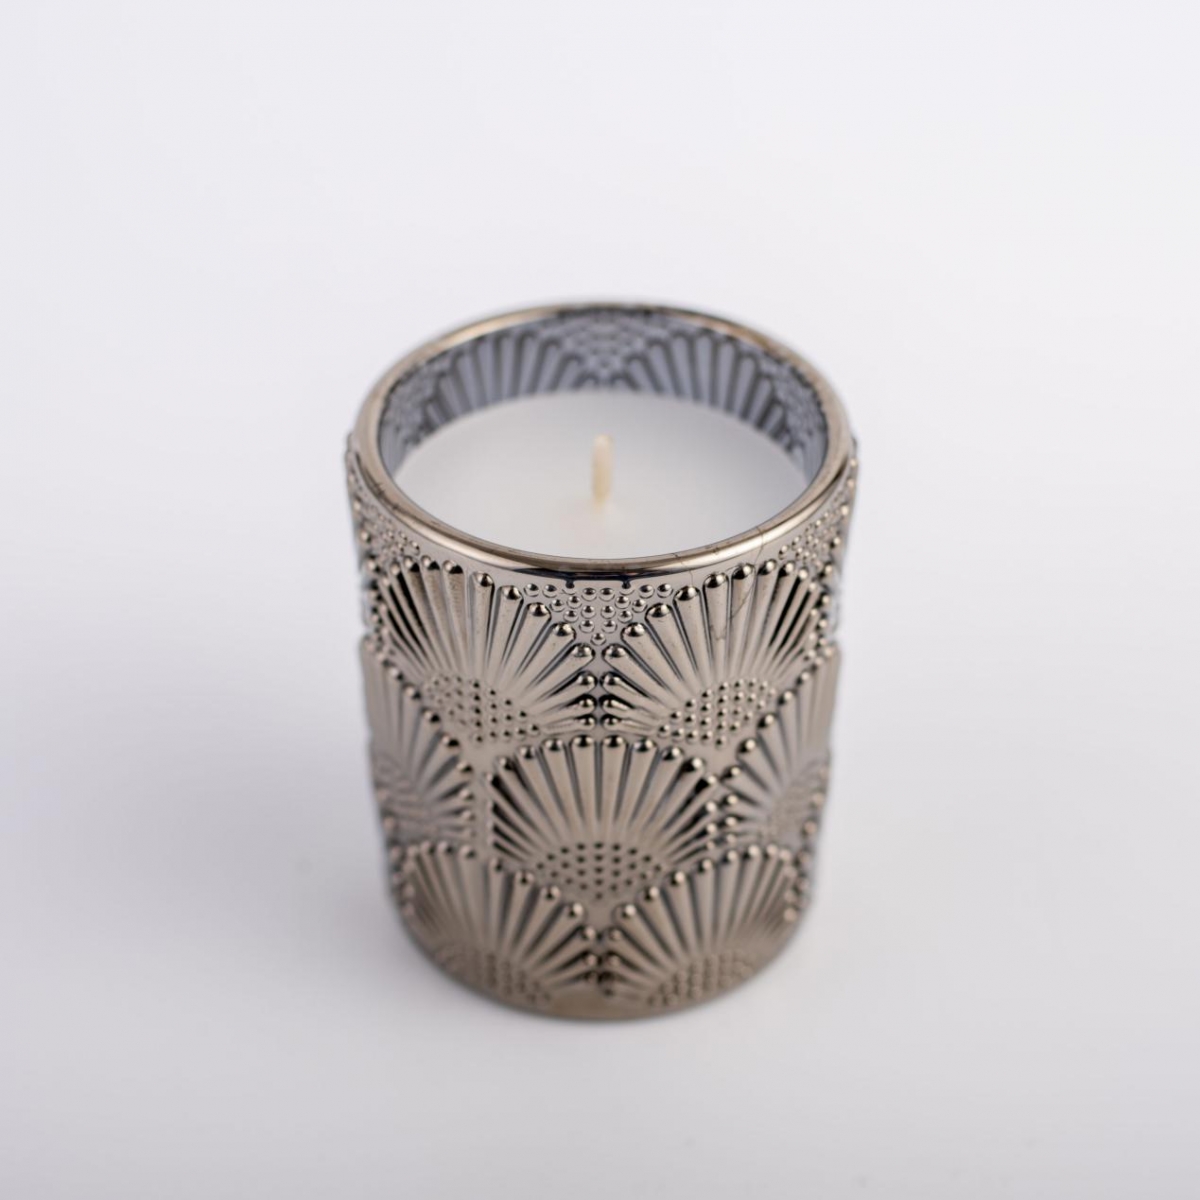 Jar Candles :Soy Wax ,Essential Oils ,Smoky Gray ,Embossed Glass , China Factory ,Cheapest Price-HOWCANDLE-Candles,Scented Candles,Aromatherapy Candles,Soy Candles,Vegan Candles,Jar Candles,Pillar Candles,Candle Gift Sets,Essential Oils,Reed Diffuser,Candle Holder,